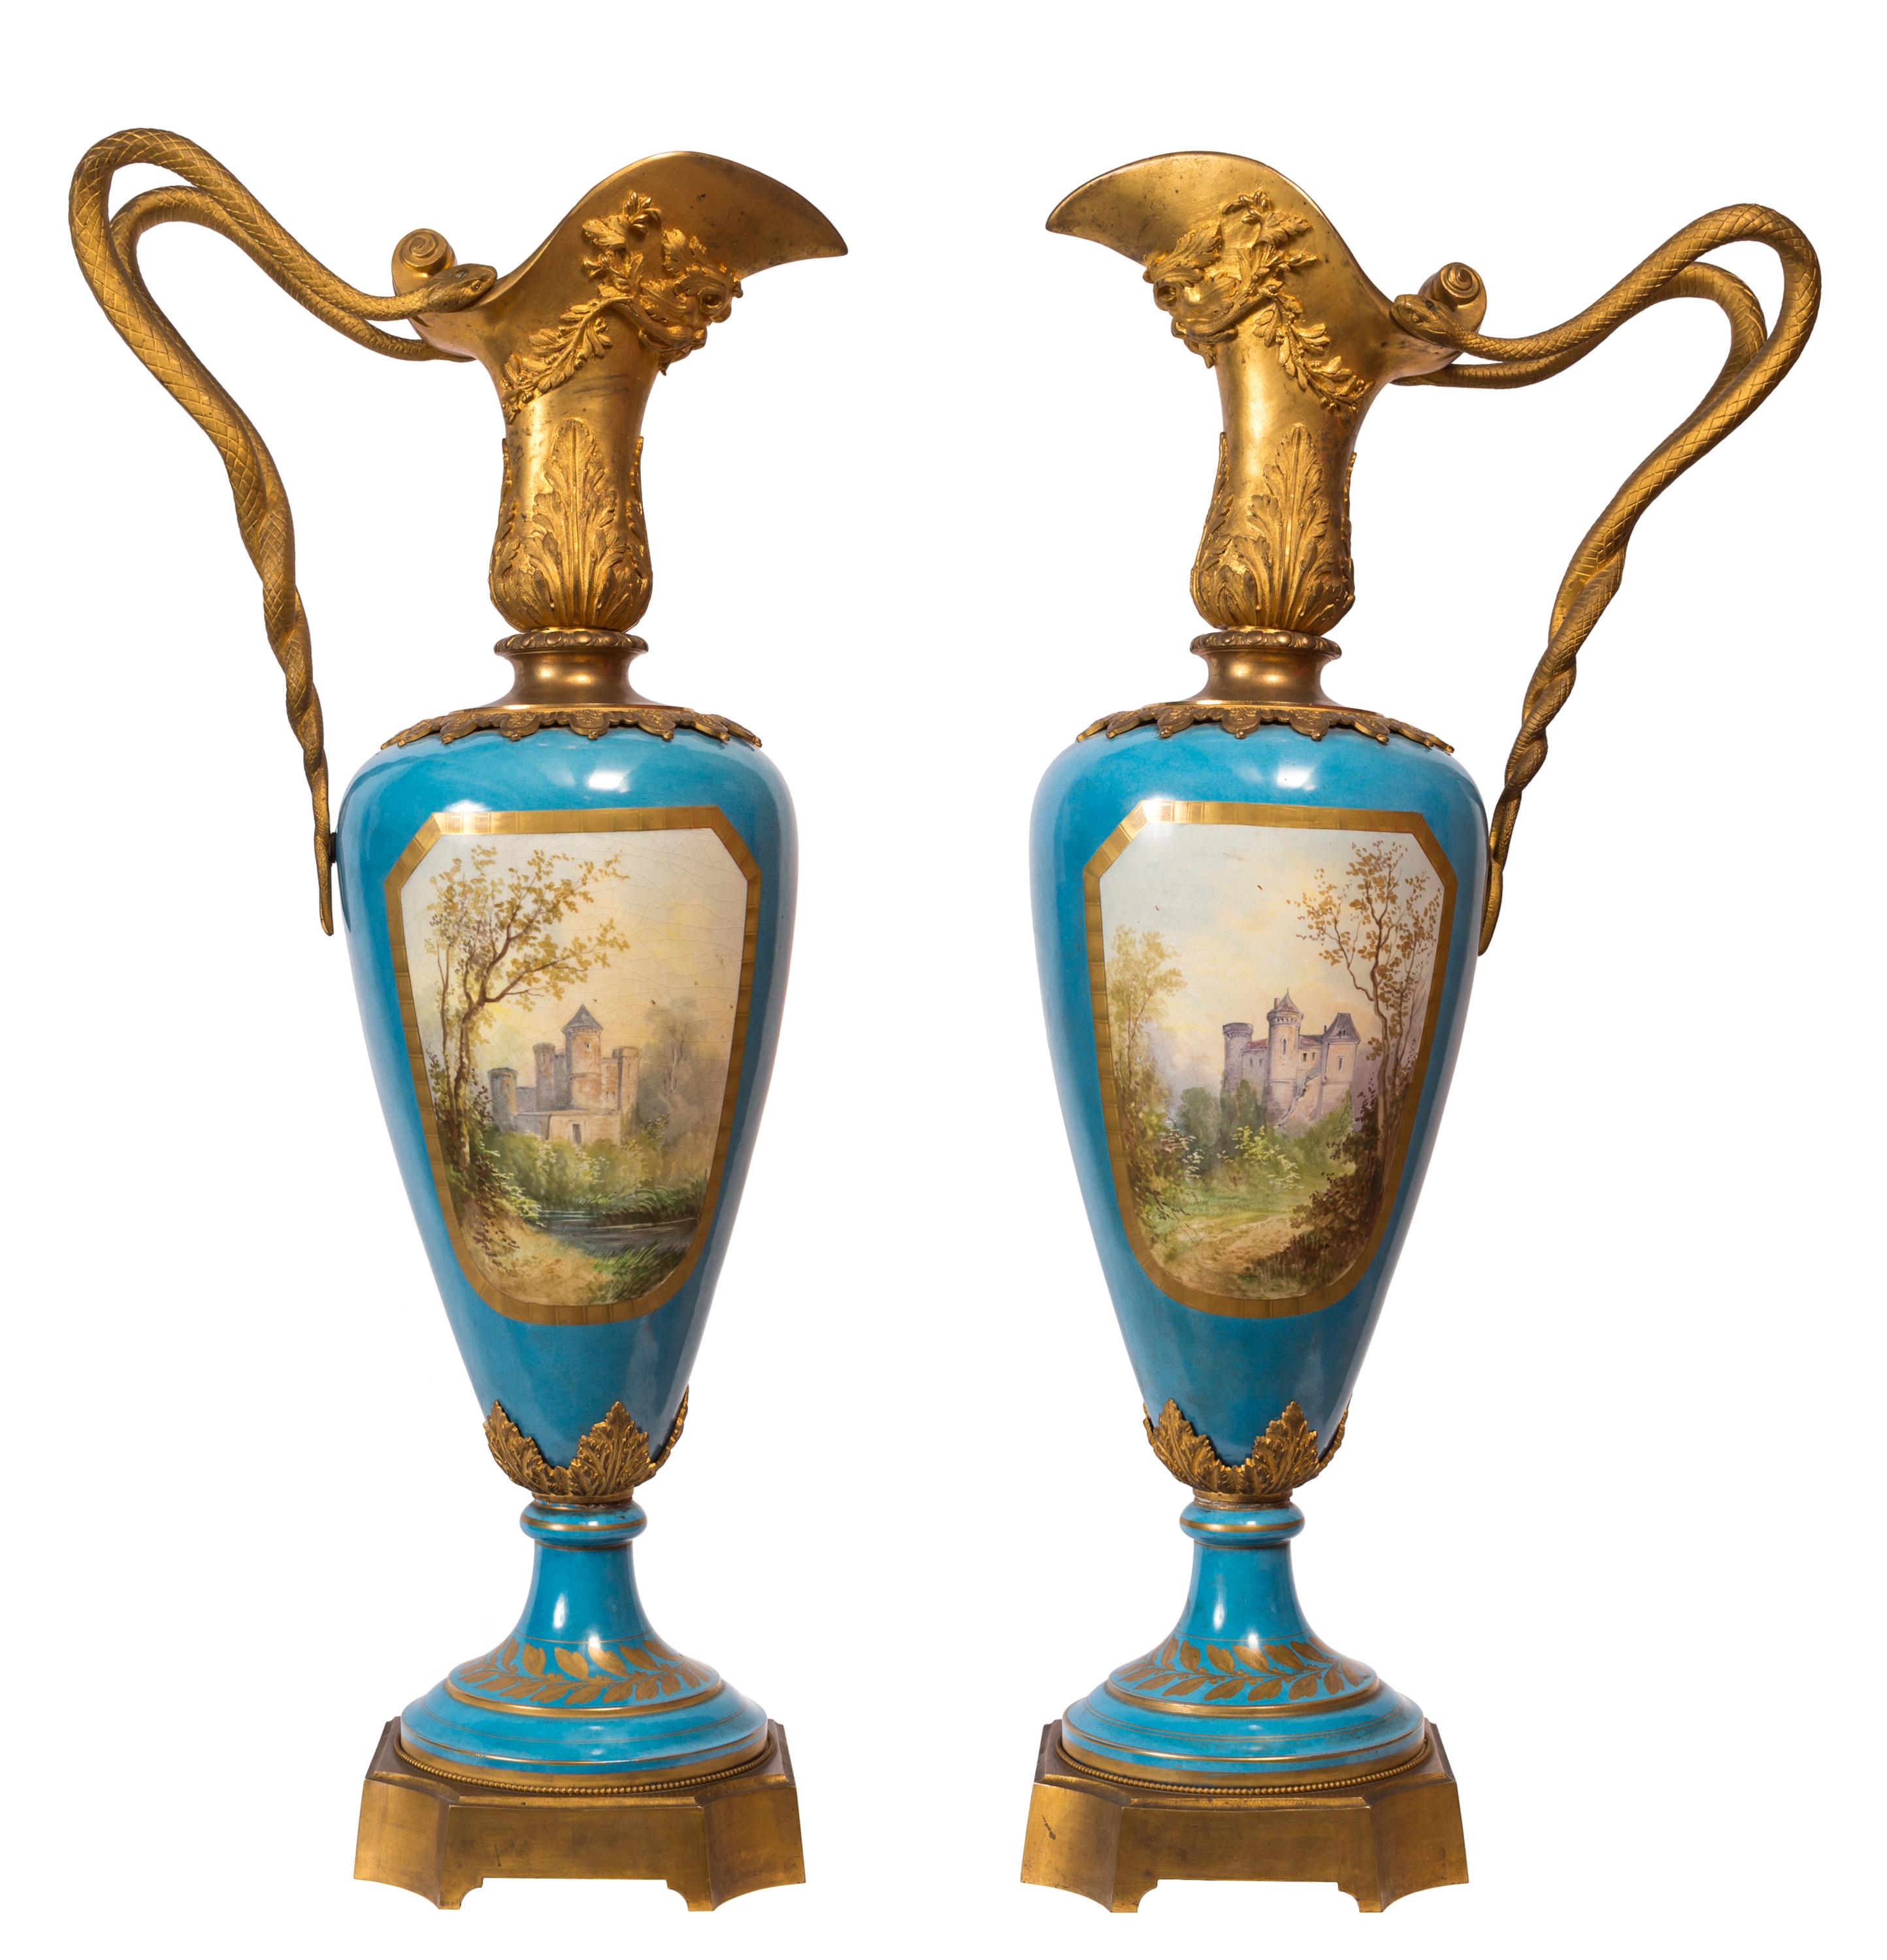 Impressive in size (1 meter / 3.28 feet), this striking pair of 19th century Sèvres style porcelain ewers / vases demonstrate a high level of detail and quality in both the metalwork and hand-painted decoration. The dual serpent handles, green man